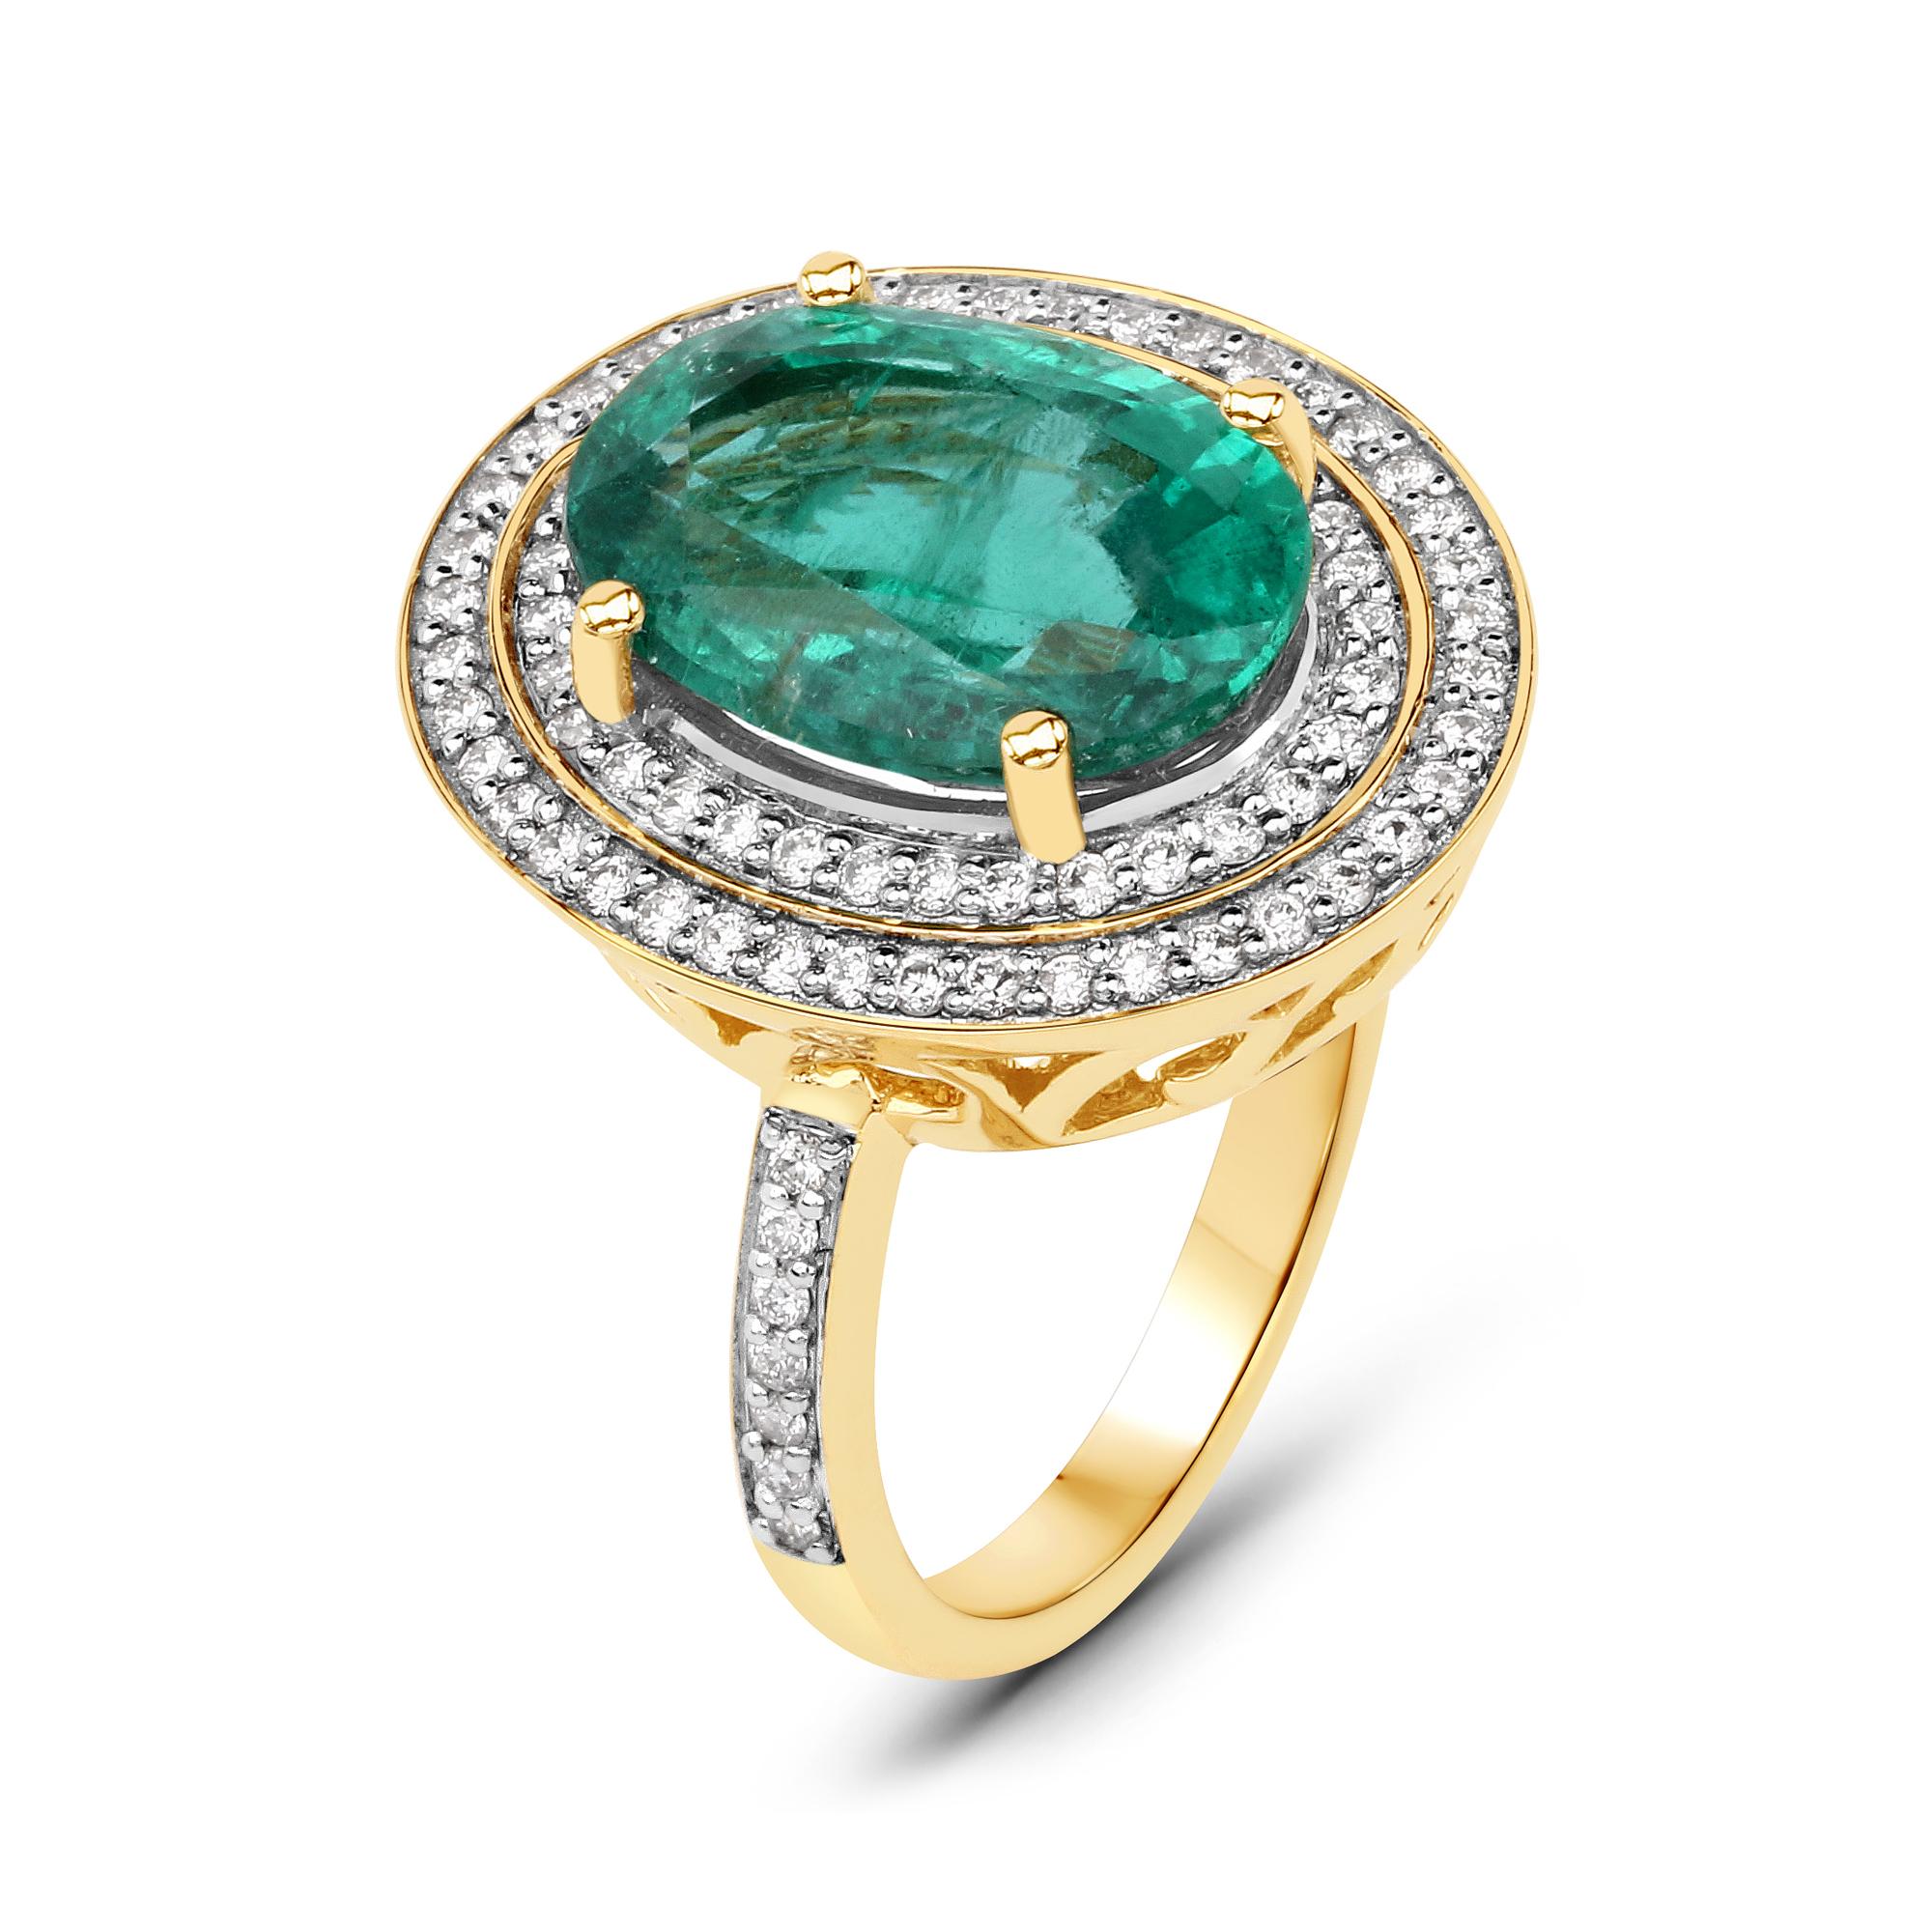 Contemporary 5.25 Carat Zambian Emerald and Diamond 18 Karat Yellow Gold Cocktail Ring For Sale